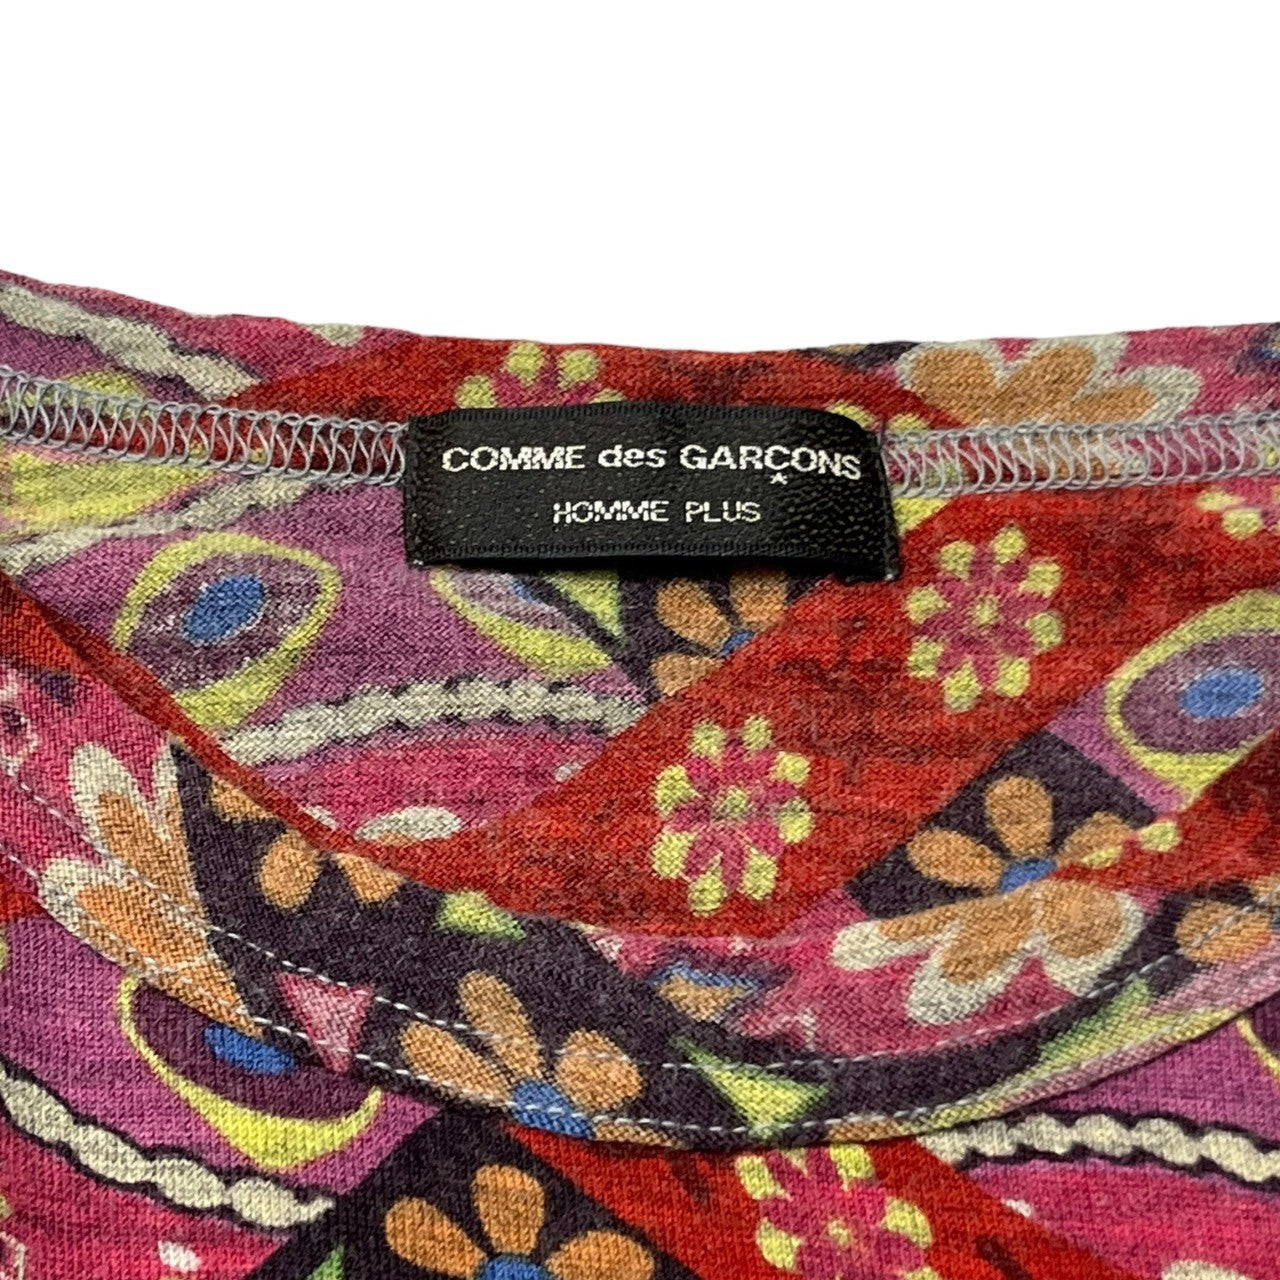 COMME des GARCONS HOMME PLUS(コムデギャルソンオムプリュス) 01AW  Flower pattern wool cut and sew フラワー パターン ウール 長袖 カットソー Tシャツ PC-T025 表記無し(M~L程度) ピンク×レッド AD2001